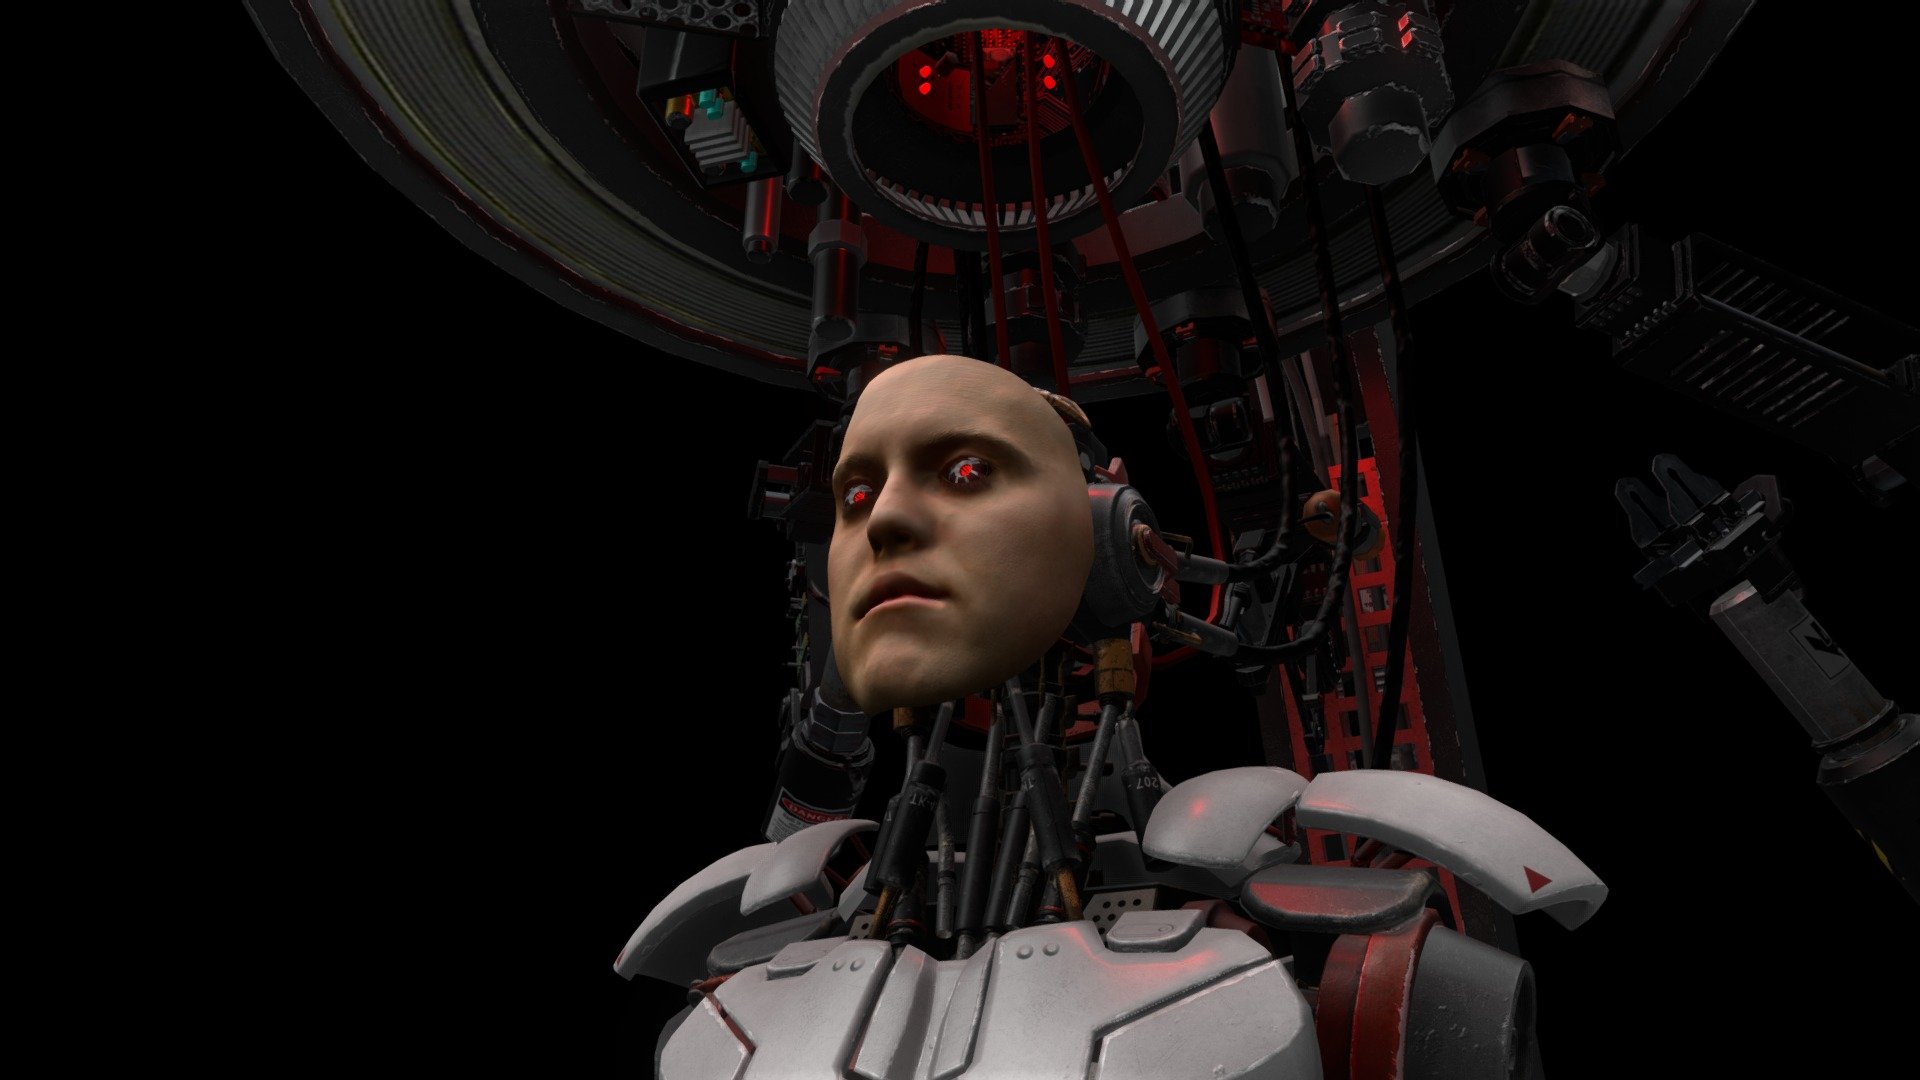 Android 93 is my attempt of realistic function over style. Ive designed everything to actually work and has functining parts inside. The trick was to have a mganifying glass while creating the detail for every chip, motherboard, and piston. This was also my first go at Agisoft and I scanned my own face for the droid 3d model